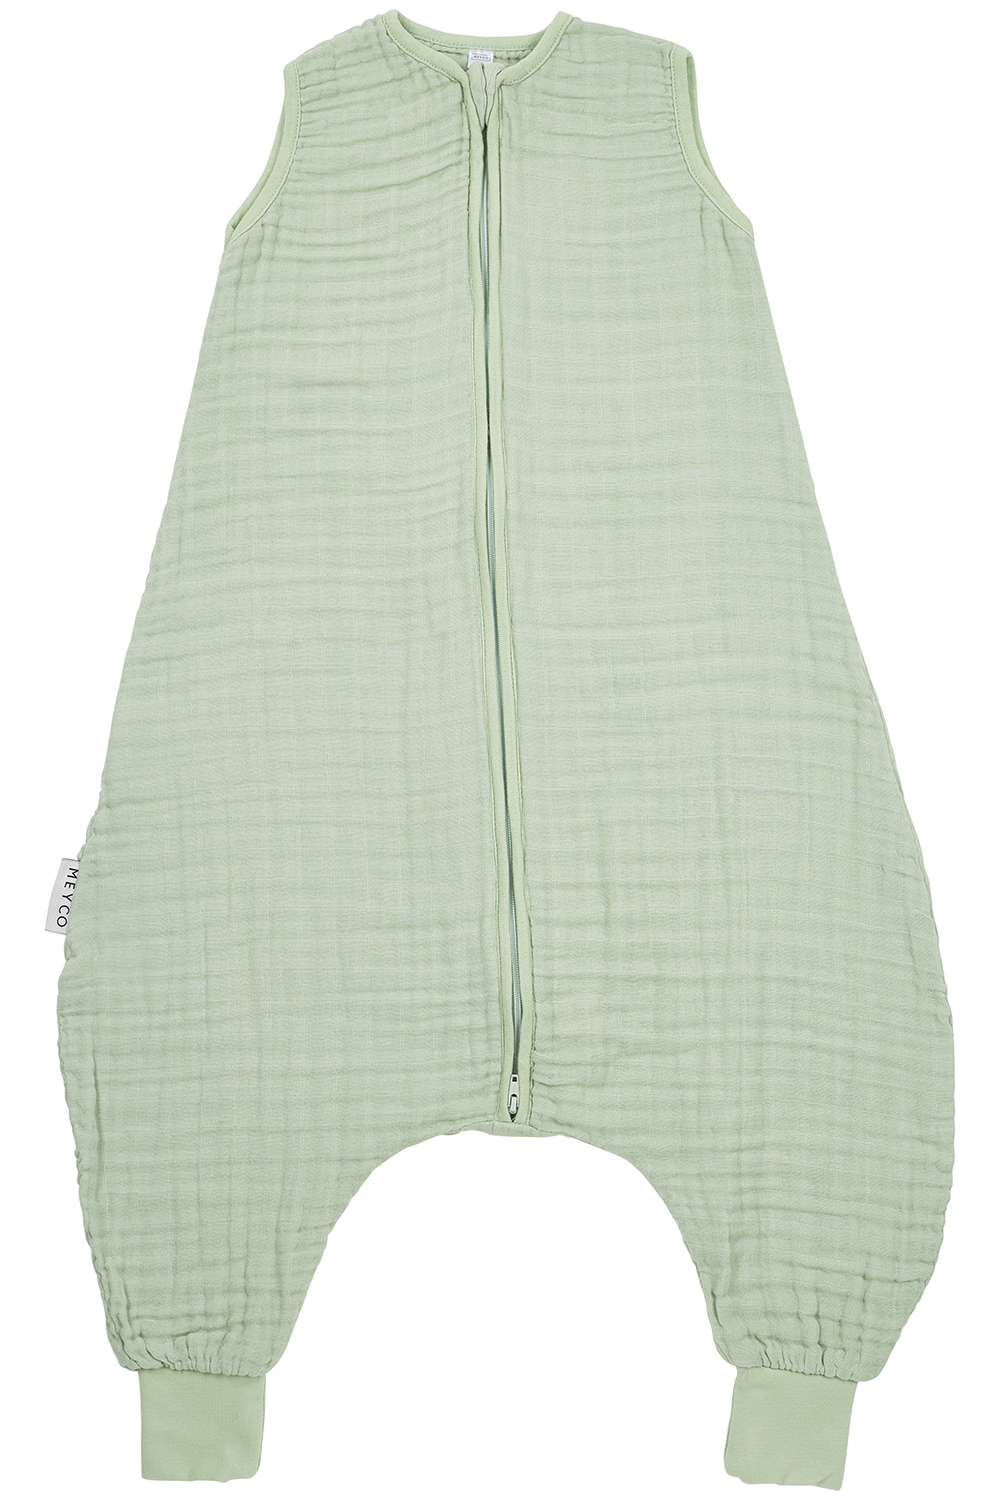 Baby sommer Schlafoverall Jumper pre-washed musselin Uni - soft green - 104cm